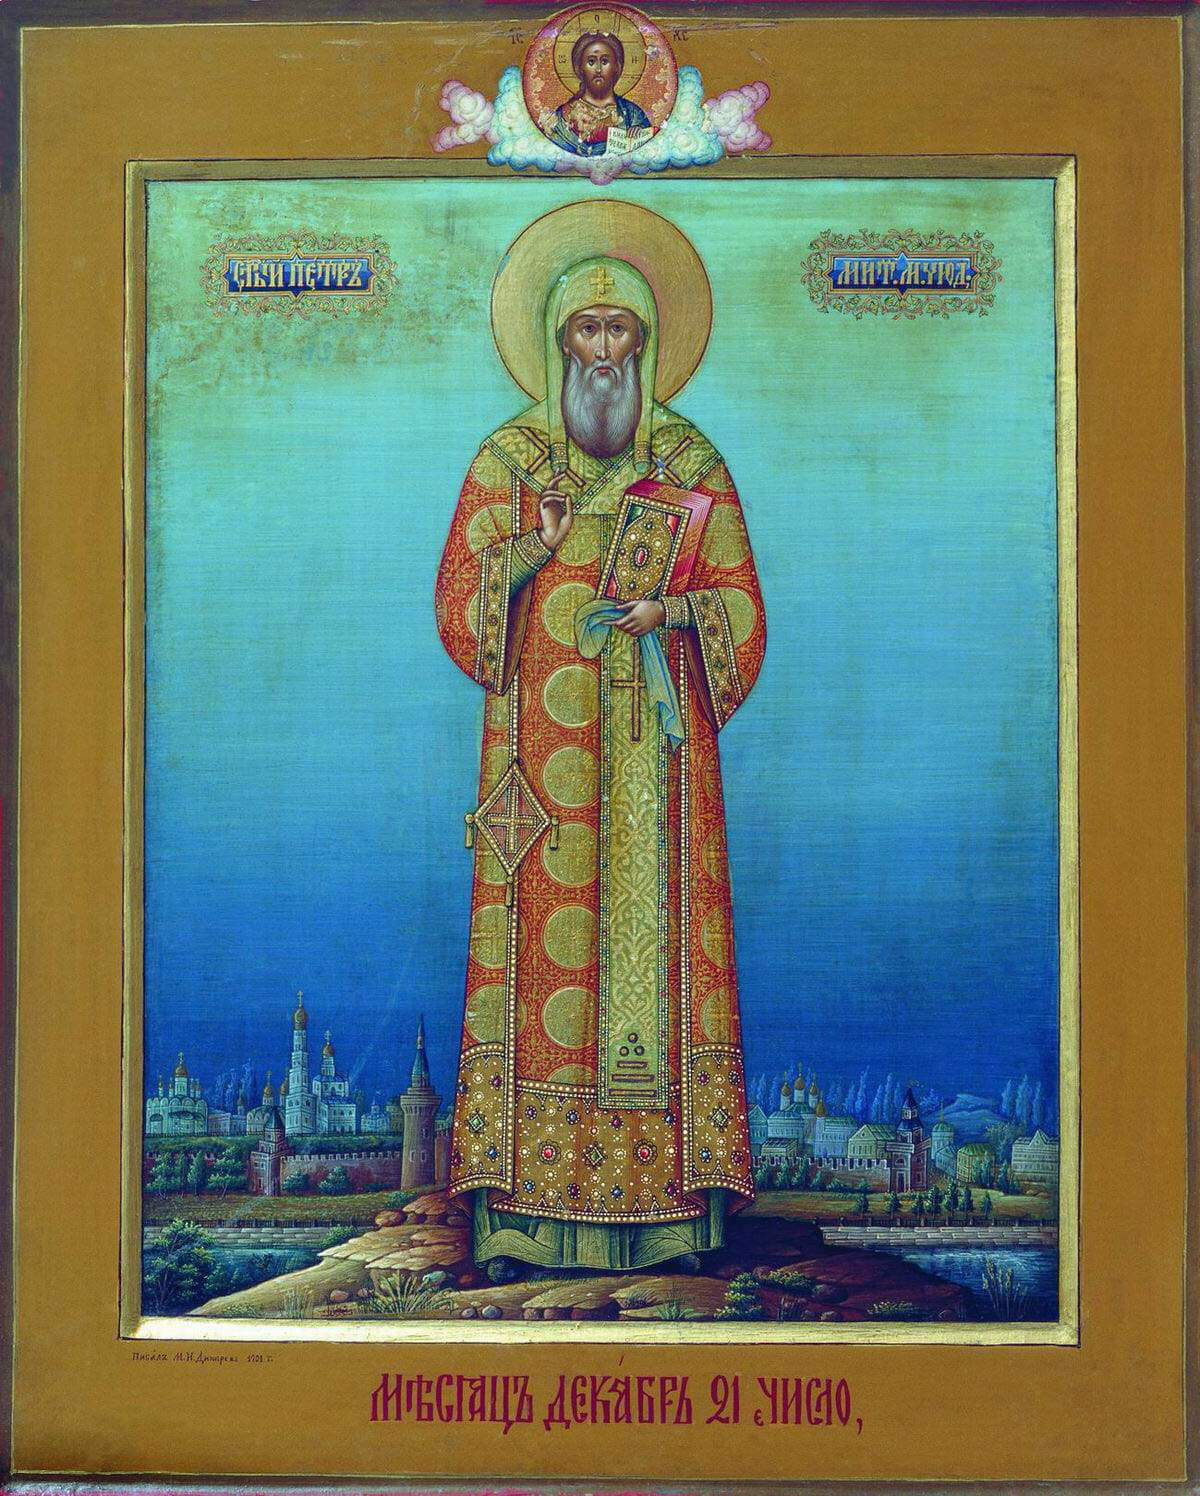 St. Peter Metropolitan Moscow the Wonderworker,  Mikhail Dikaryov, 1901. An exquisite example of the one of the most renown representatives of the Mstera style working in Moscow at the turn of the 20th century. 